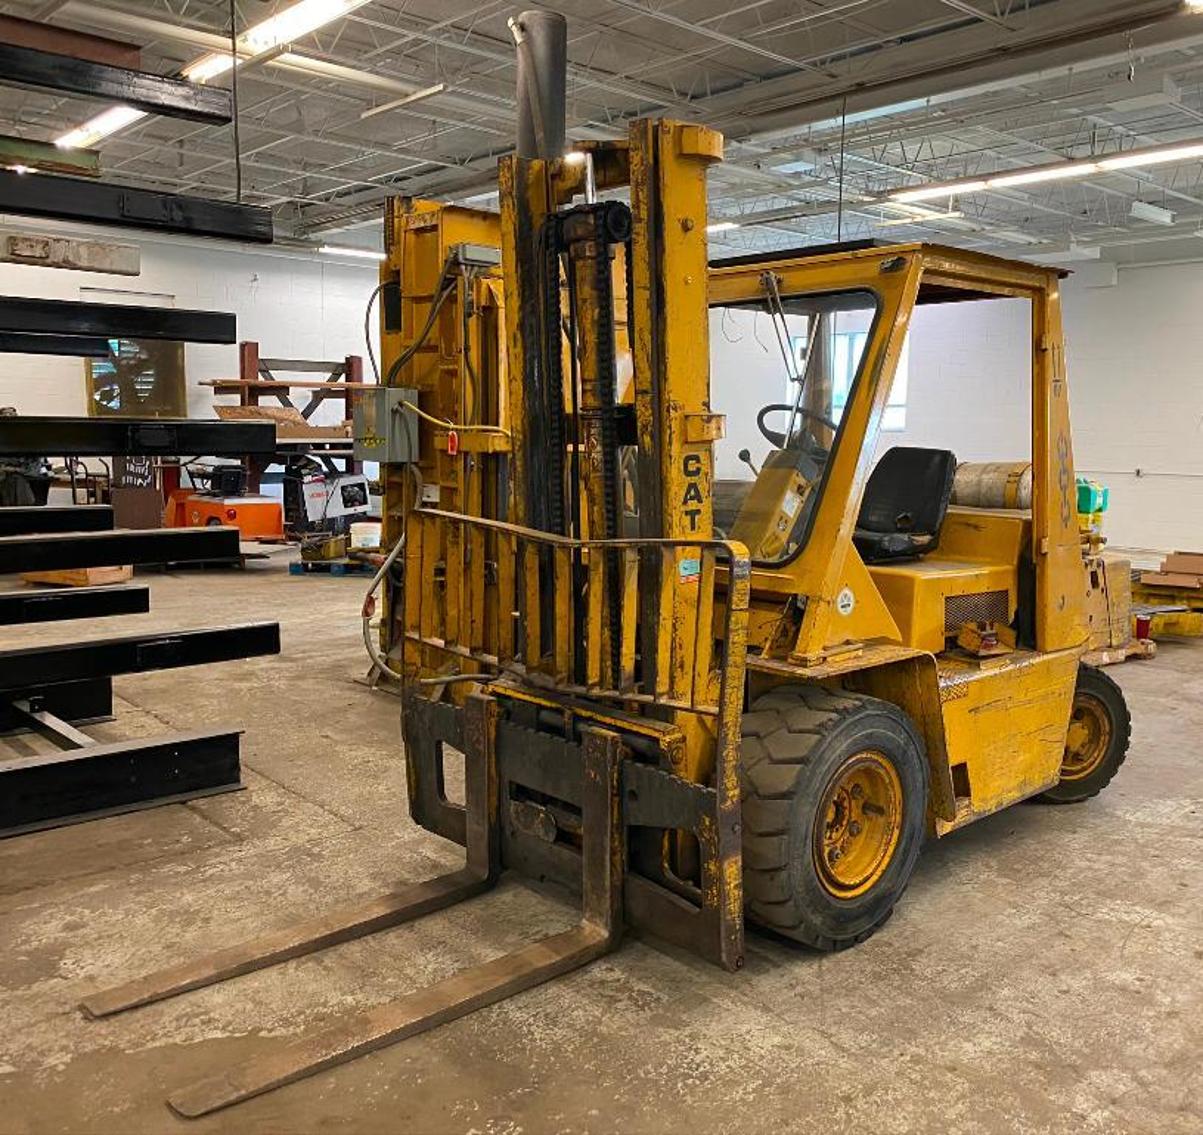 Job Shop Retirement Auction: Lightly Used Well Maintained Equipment